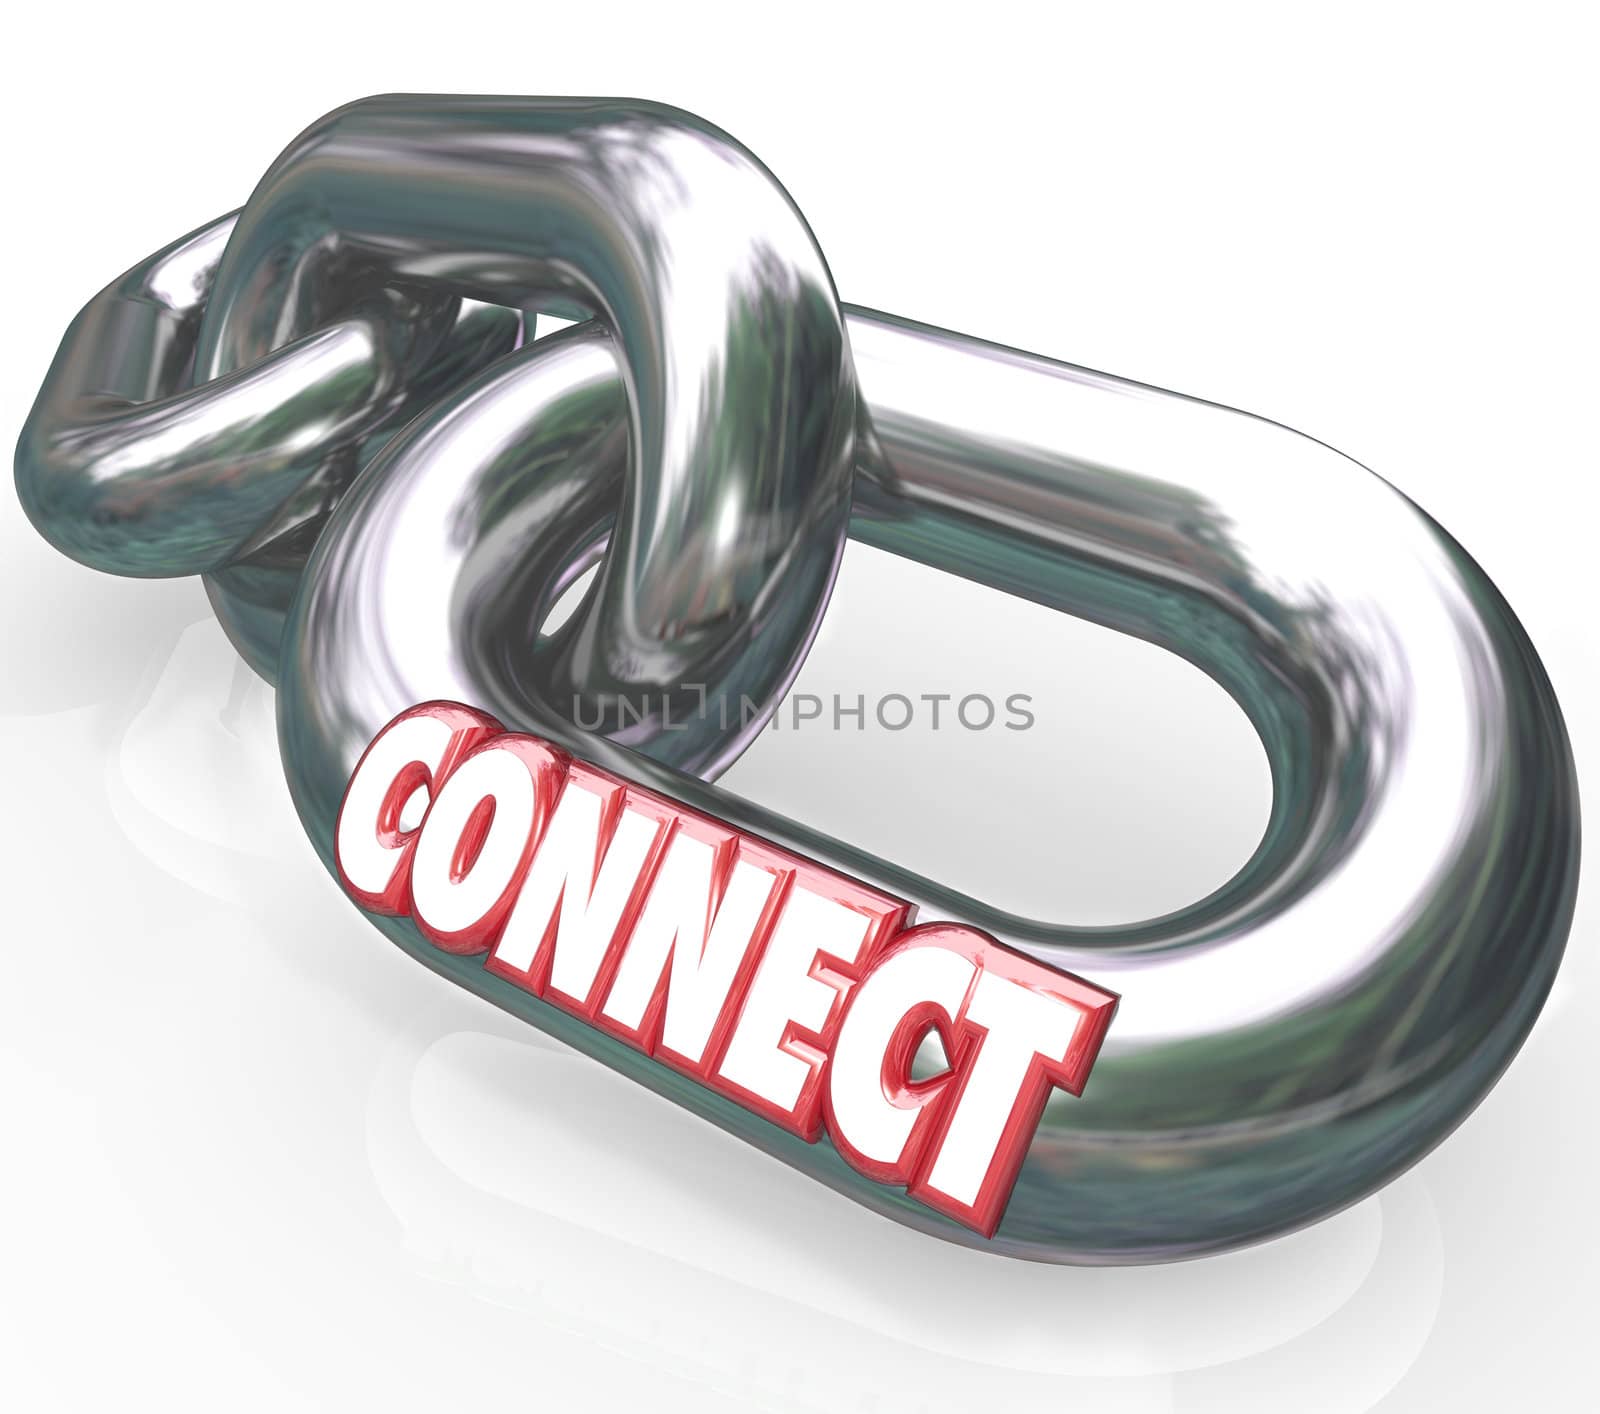 Several metal chains linked together with the word Connect in red letters to represent strong bonds and relationships forged by friendships, family and networking